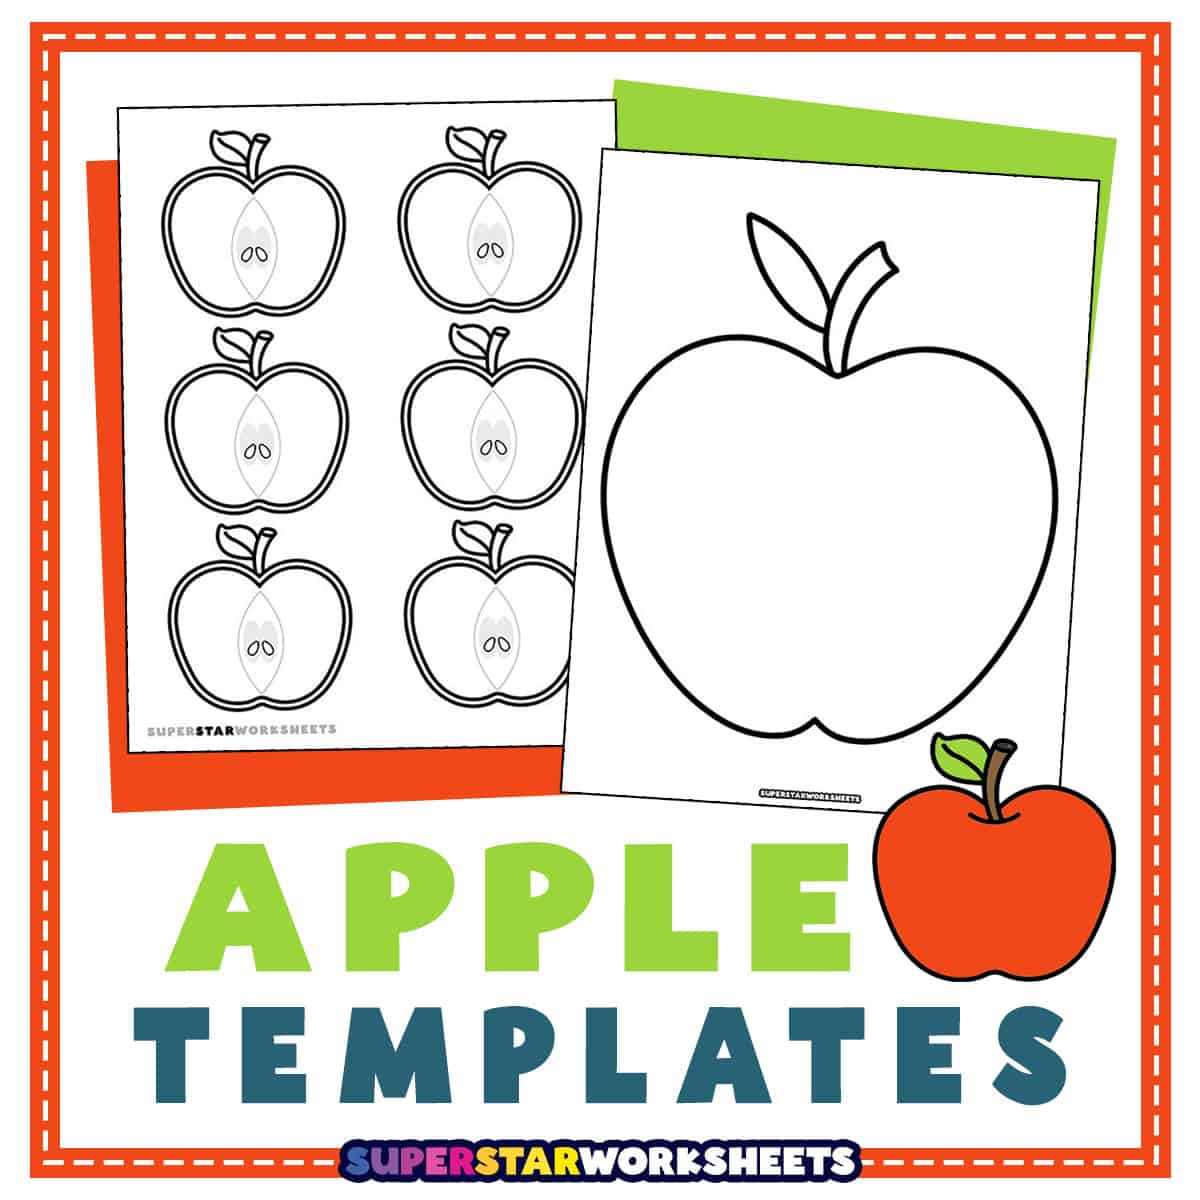 studying student clipart black and white apple